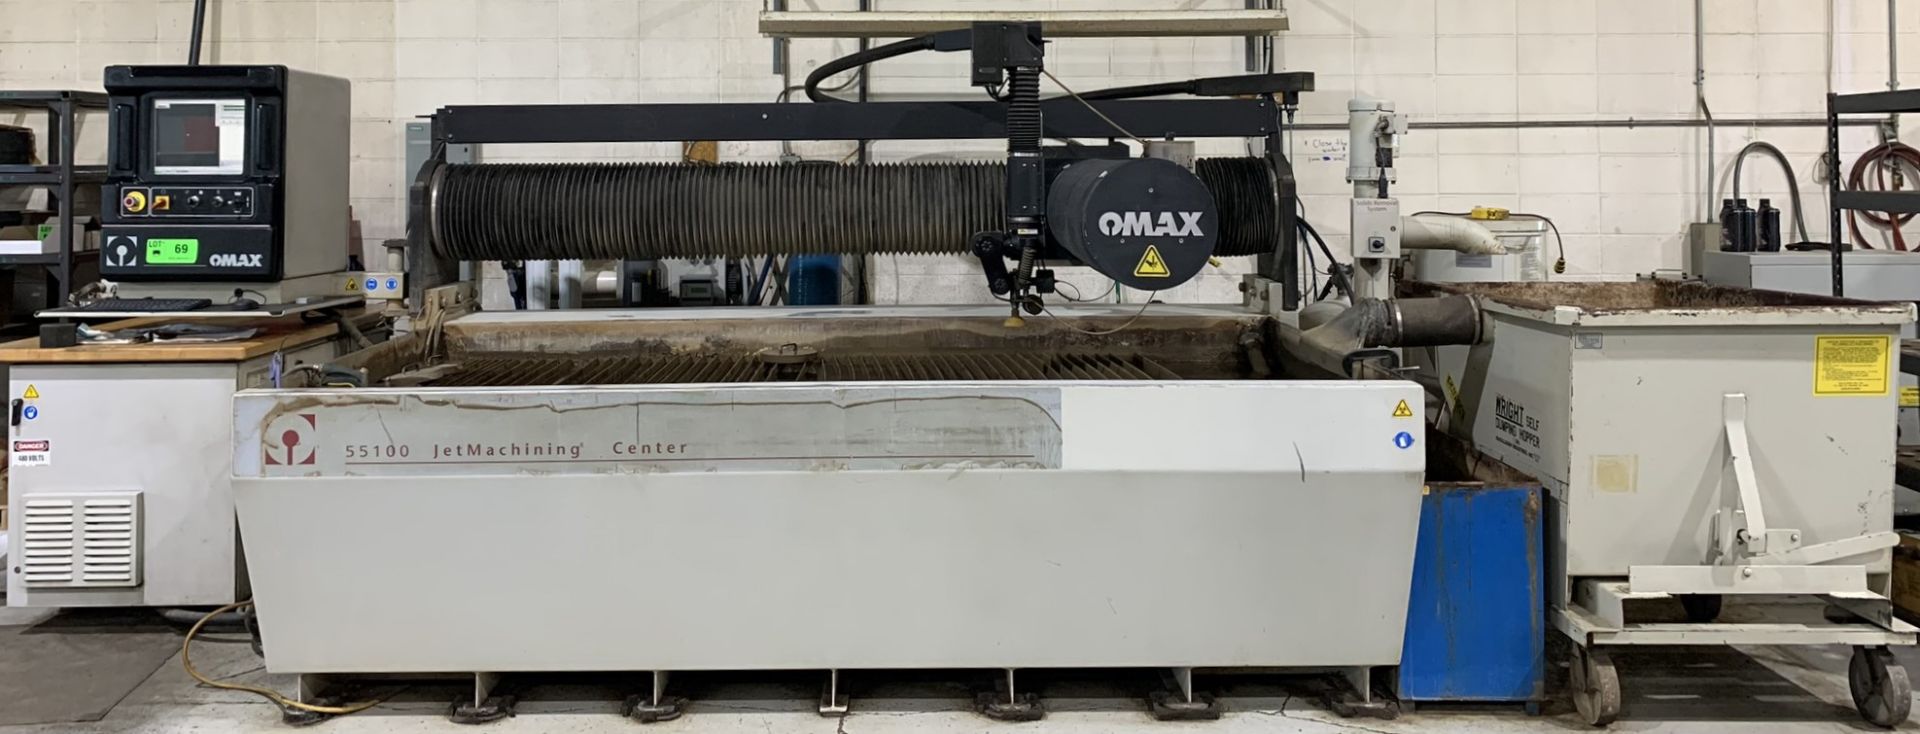 OMAX (2007) 55100 CNC WATERJET CUTTING SYSTEM WITH OMAX WINDOWS PC BASED CNC CONTROL, 55" X 100"